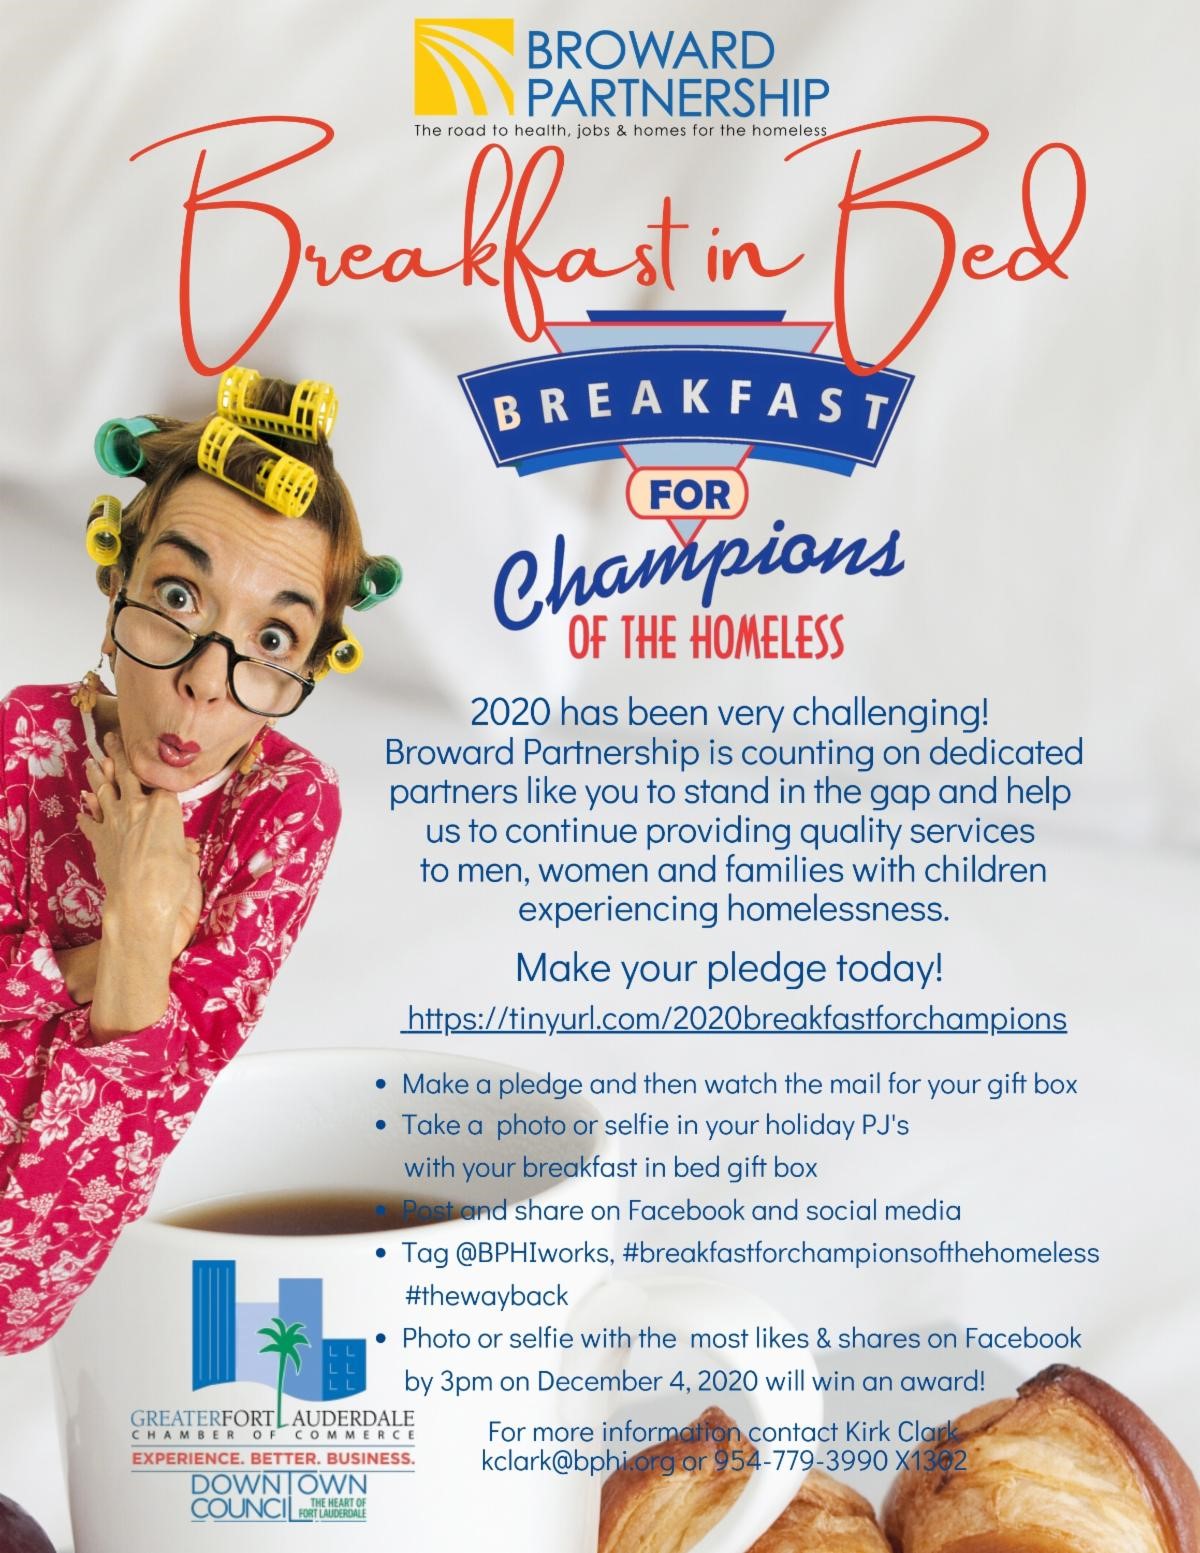 2020 Breakfast for Champions of the Homeless